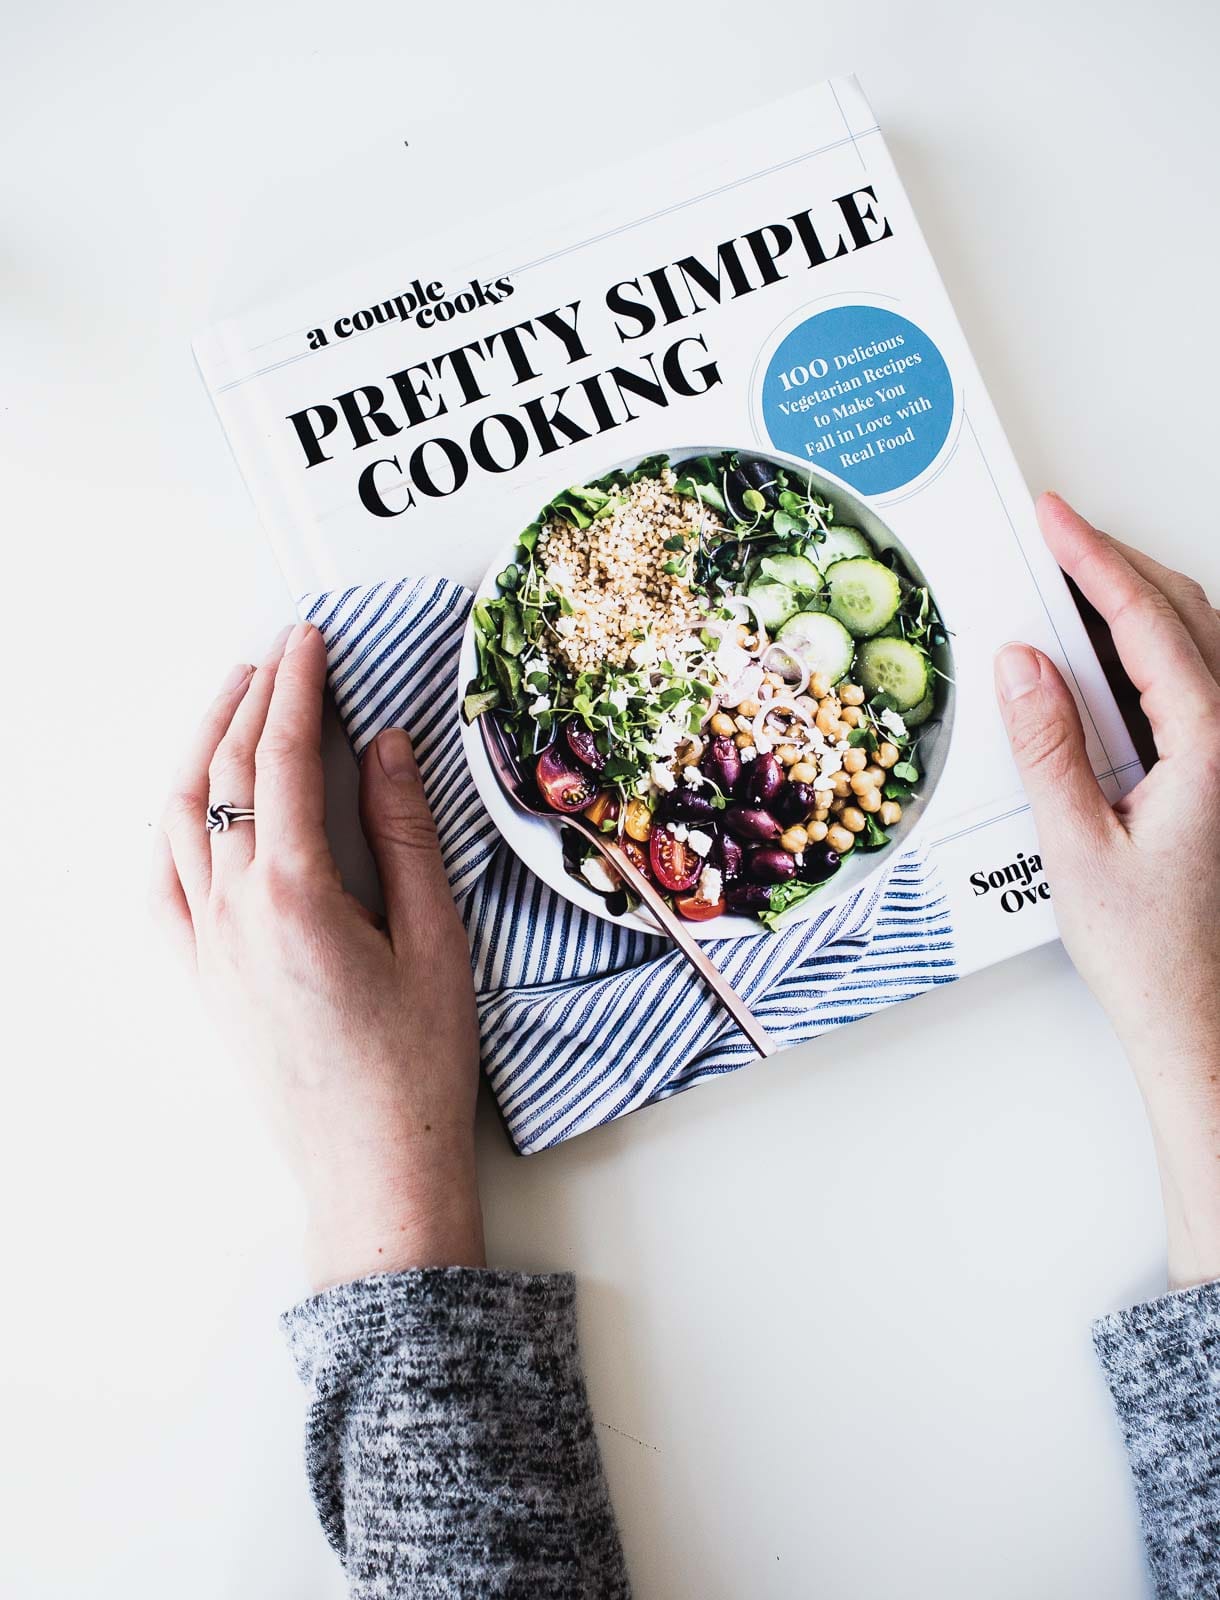 Pretty Simple Cooking Cookbook